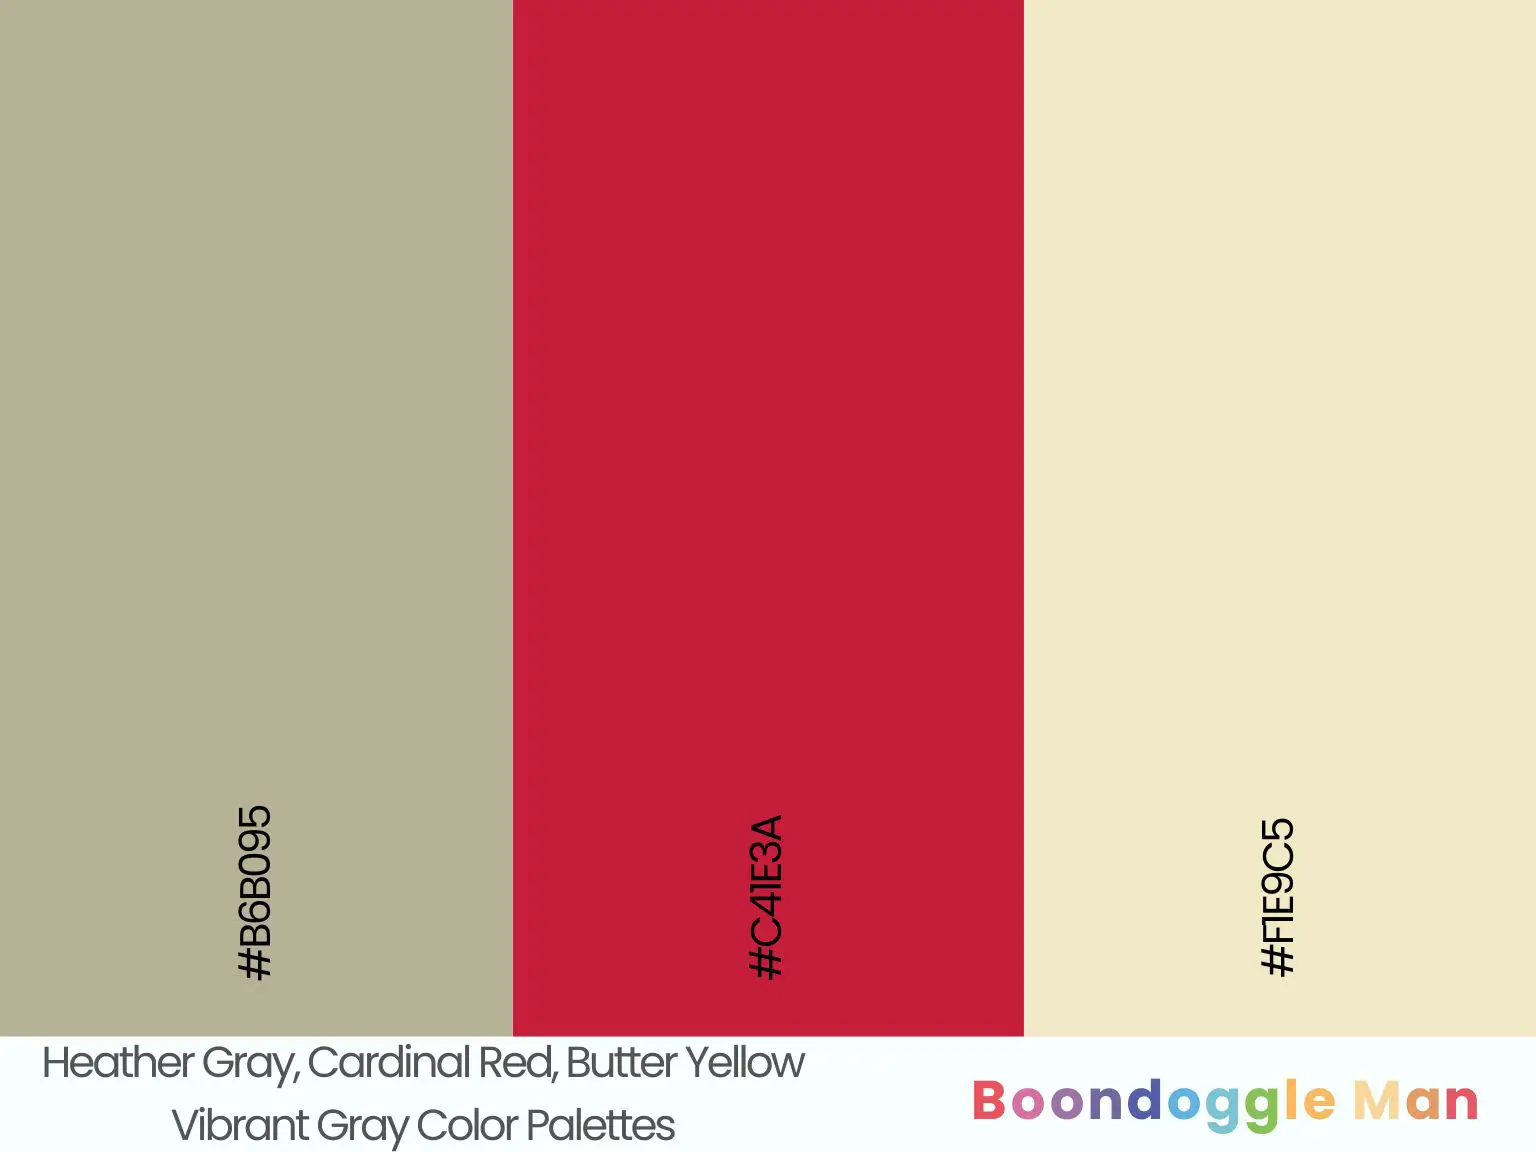 Heather Gray, Cardinal Red, Butter Yellow